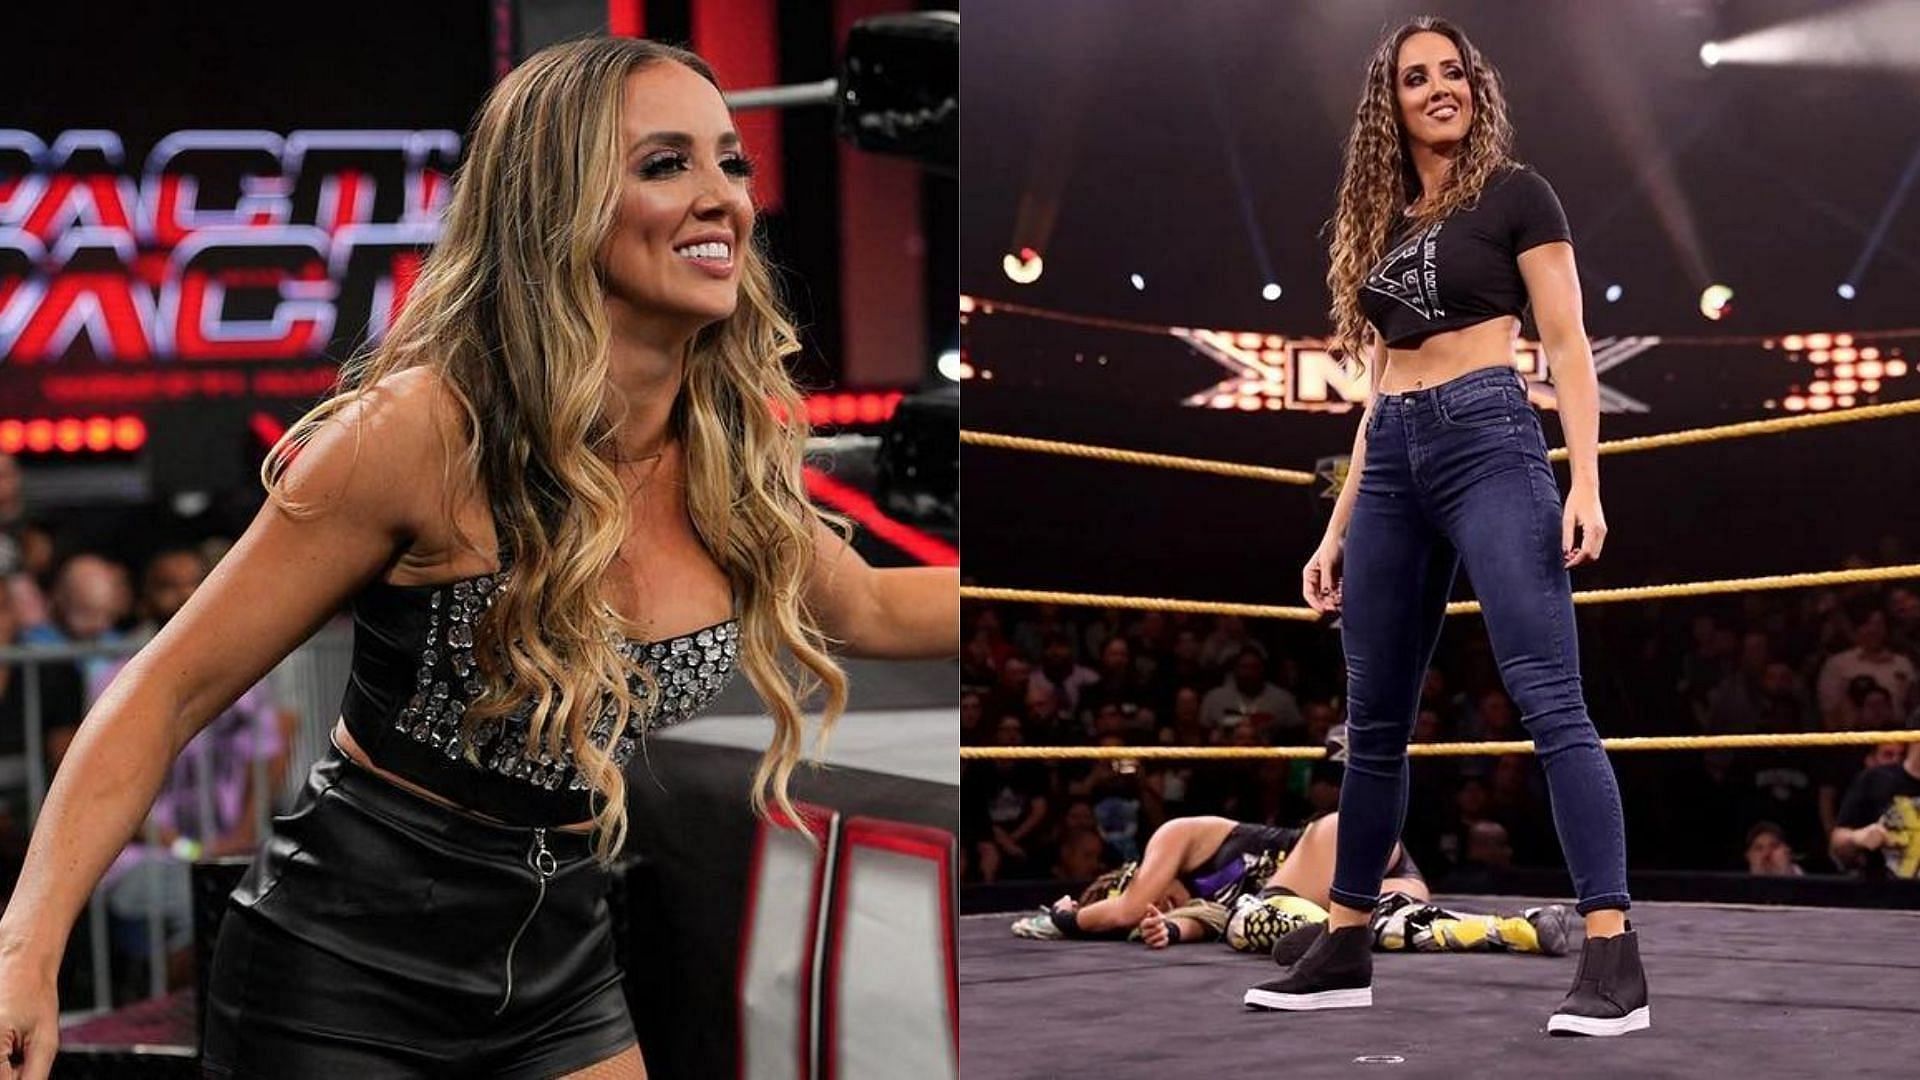 Is Chelsea Green returning to WWE?